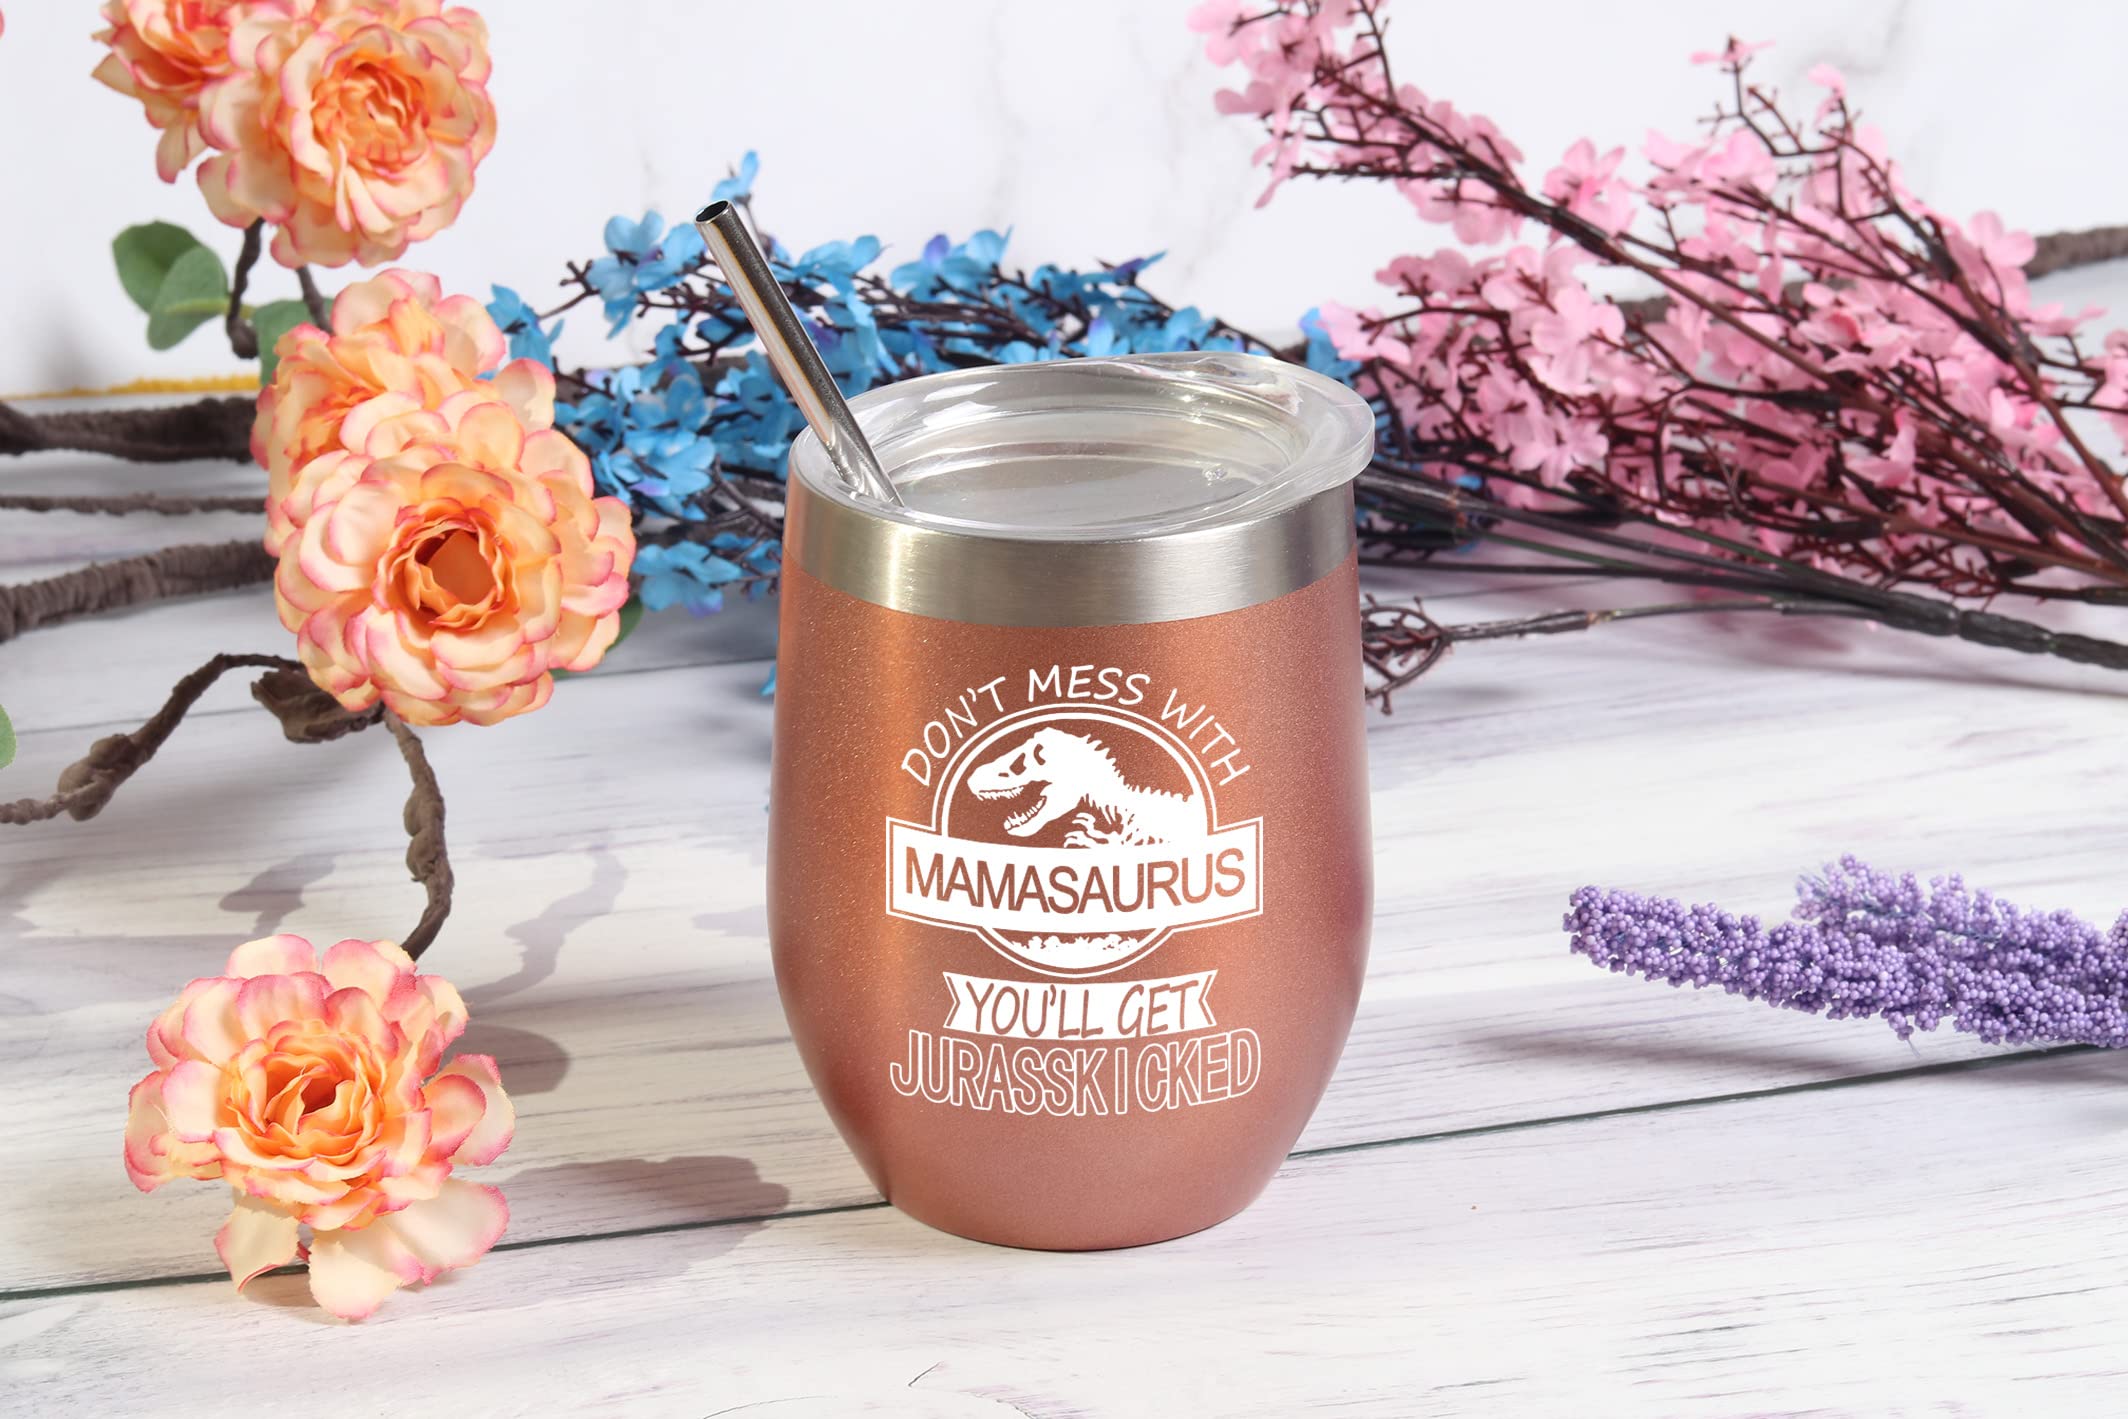 Mamasaurus Tumbler Don't Mess with Mamasaurus You'll Get Jurasskicked Tumbler Birthday Mothers Day Gifts for Mom from Daughter Son Kids Mom Gifts 12 Ounce with Gift Box Rose Gold